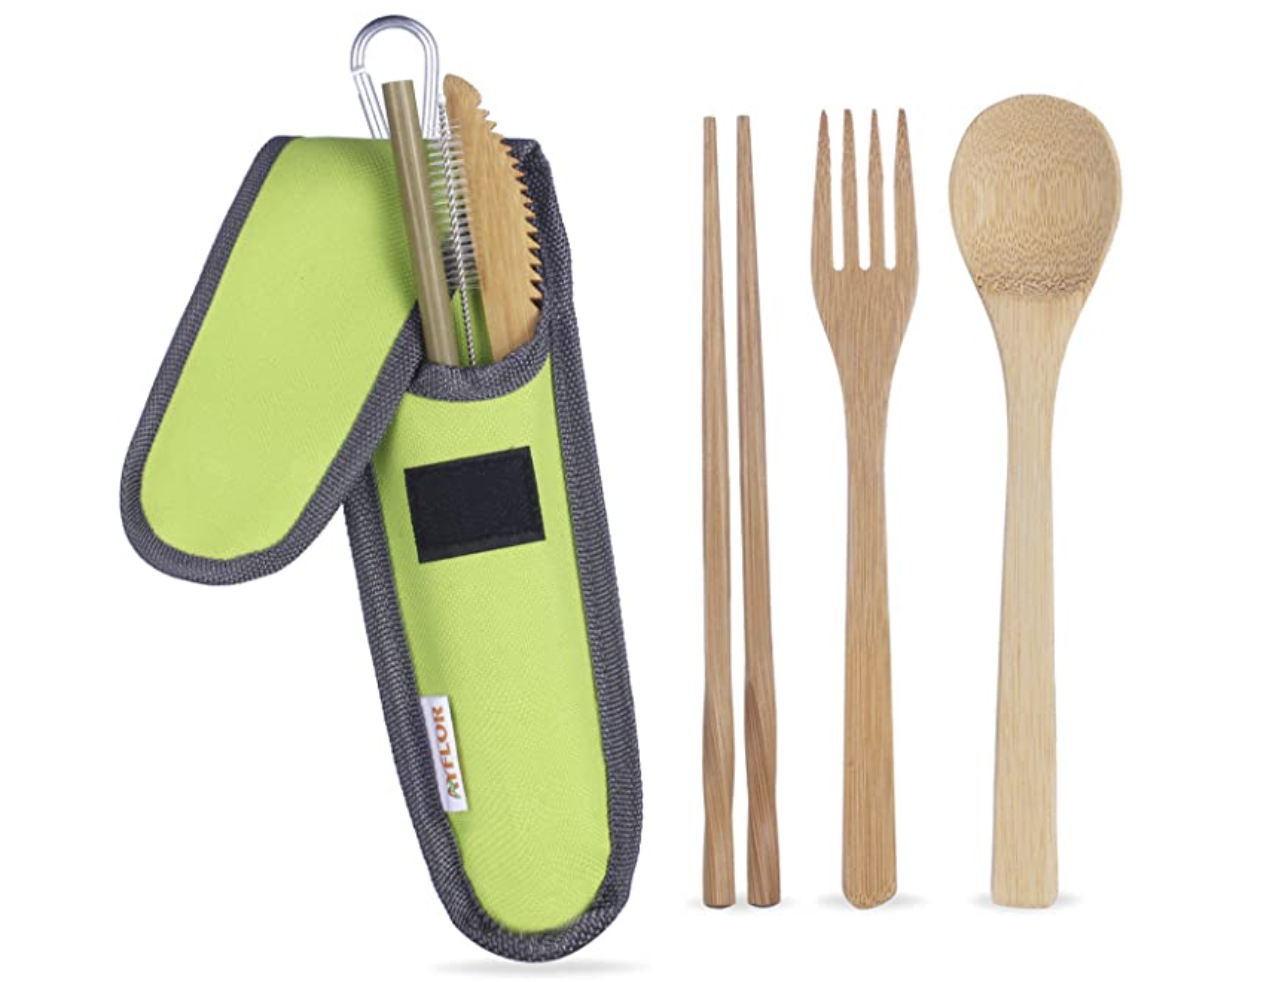 bamboo utensils for people who like to cook